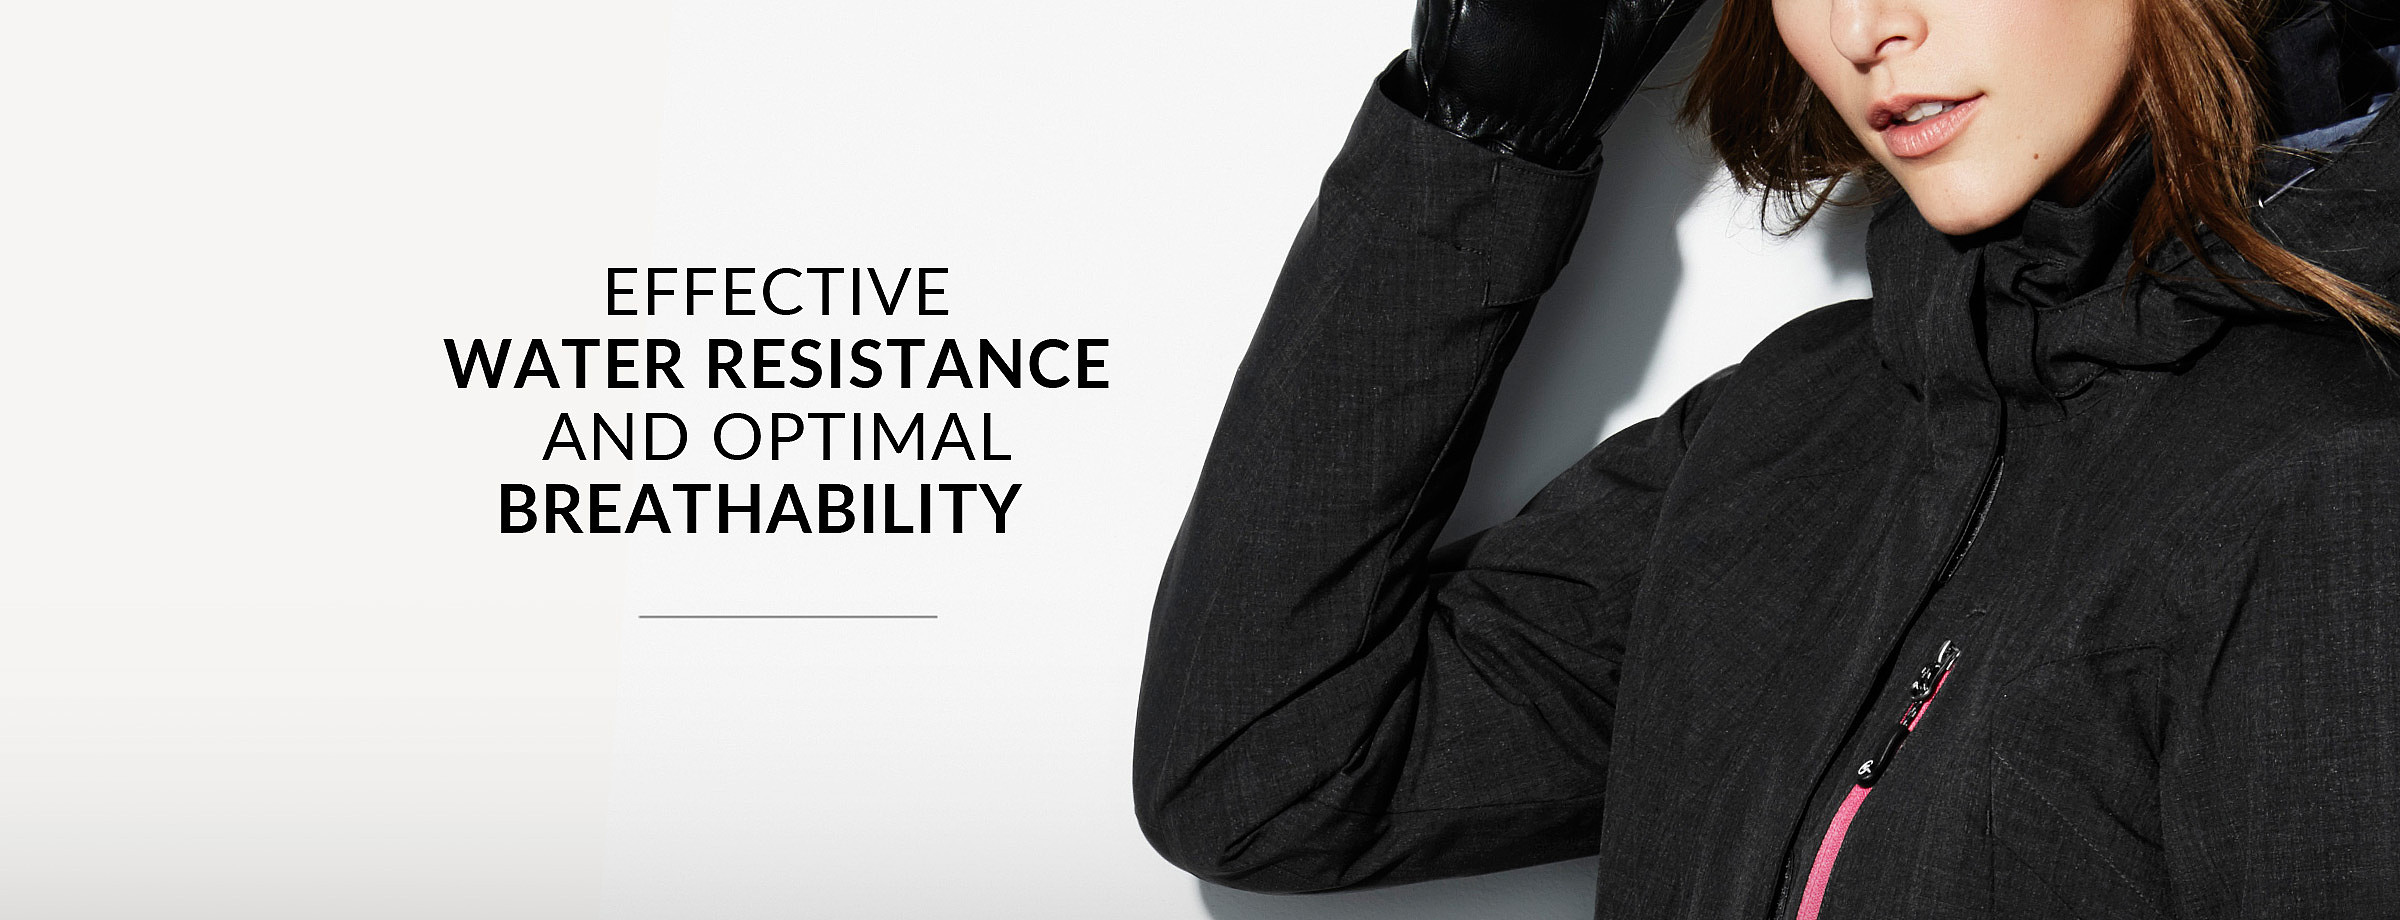 Water resistance and breathability